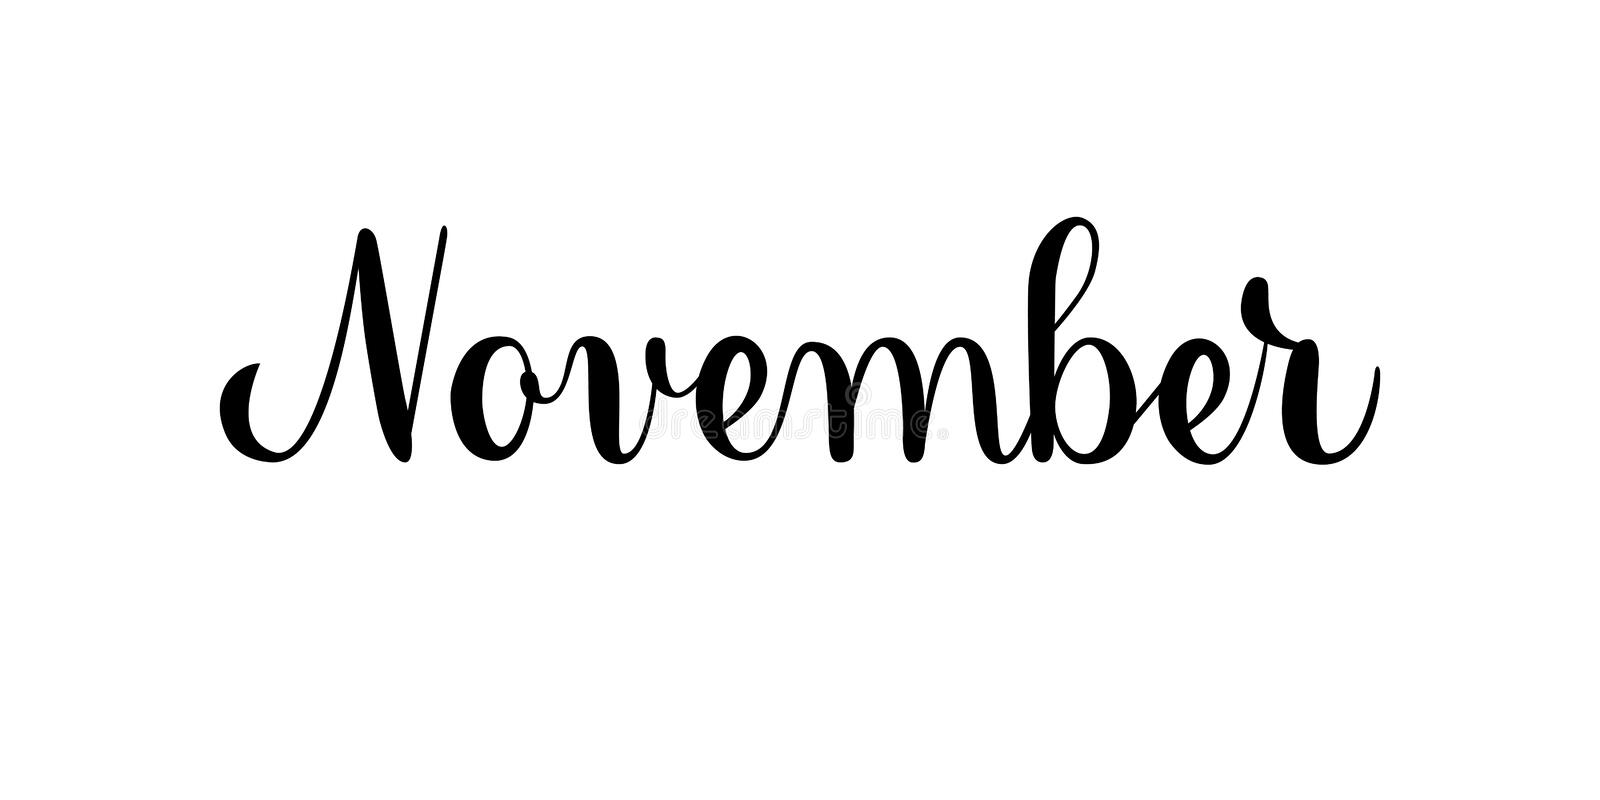 What is on in November?